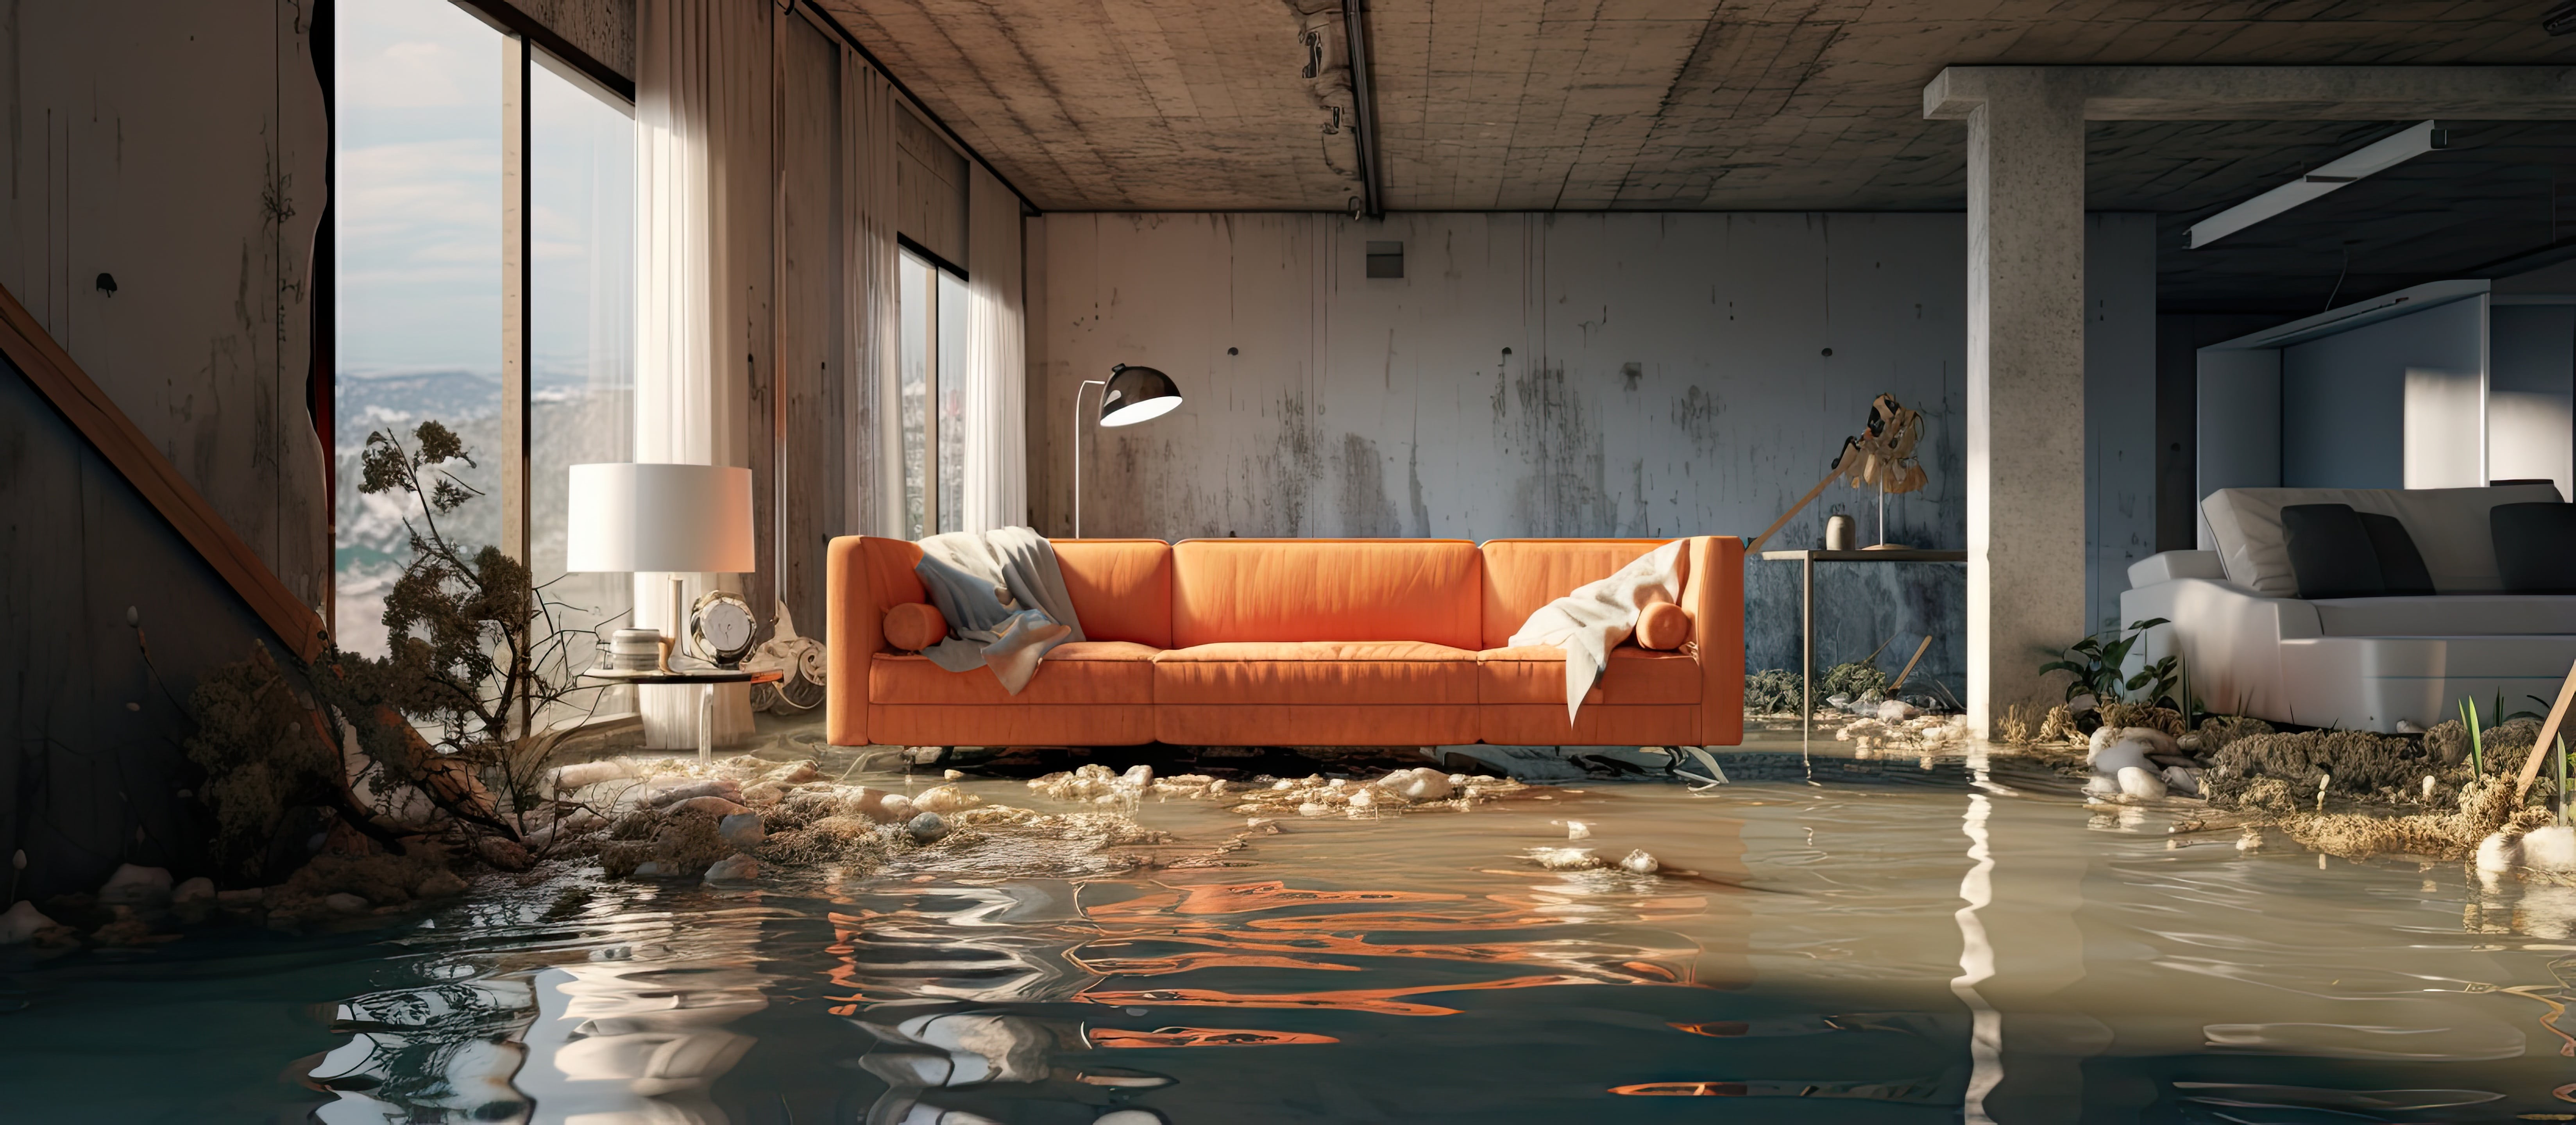 Top Water Damage Restoration in Brooklyn: Fast, Reliable Services